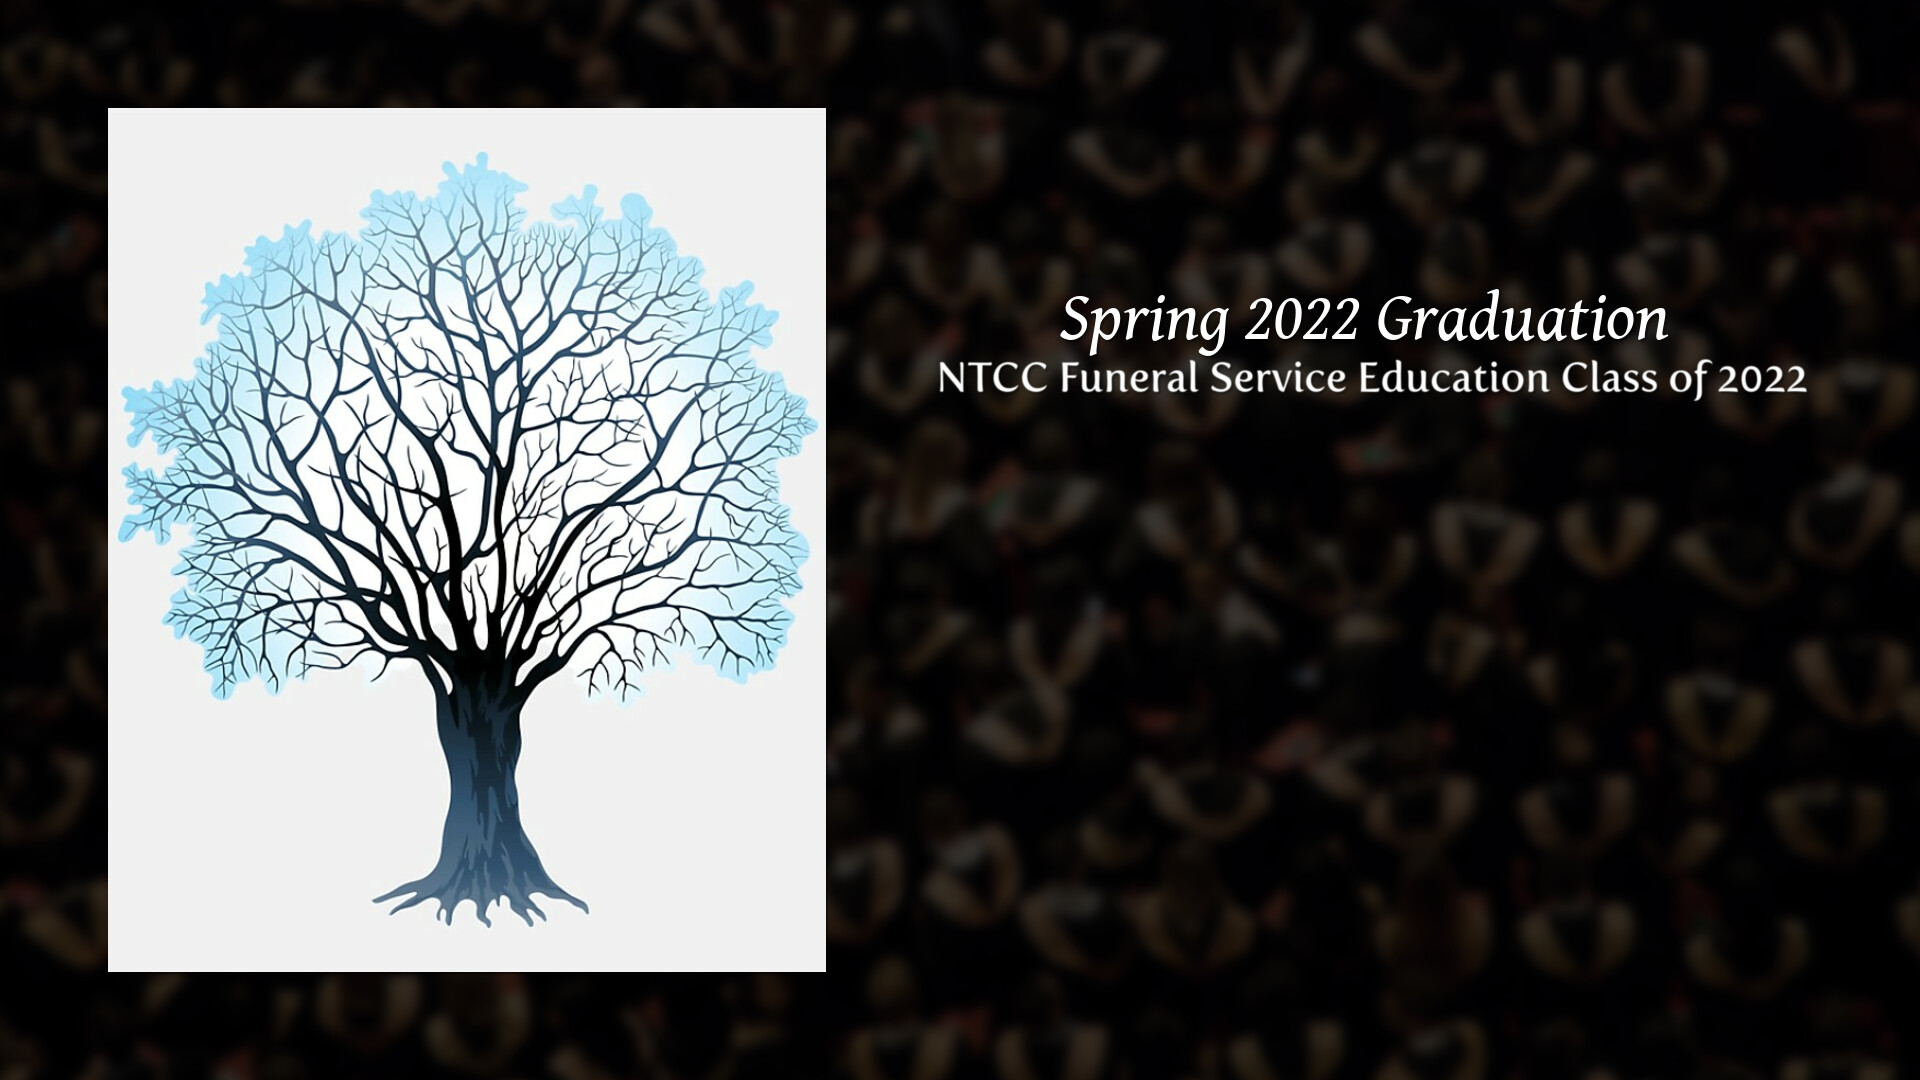 NTCC Funeral Service Education Class of 2022 - Tribute Video